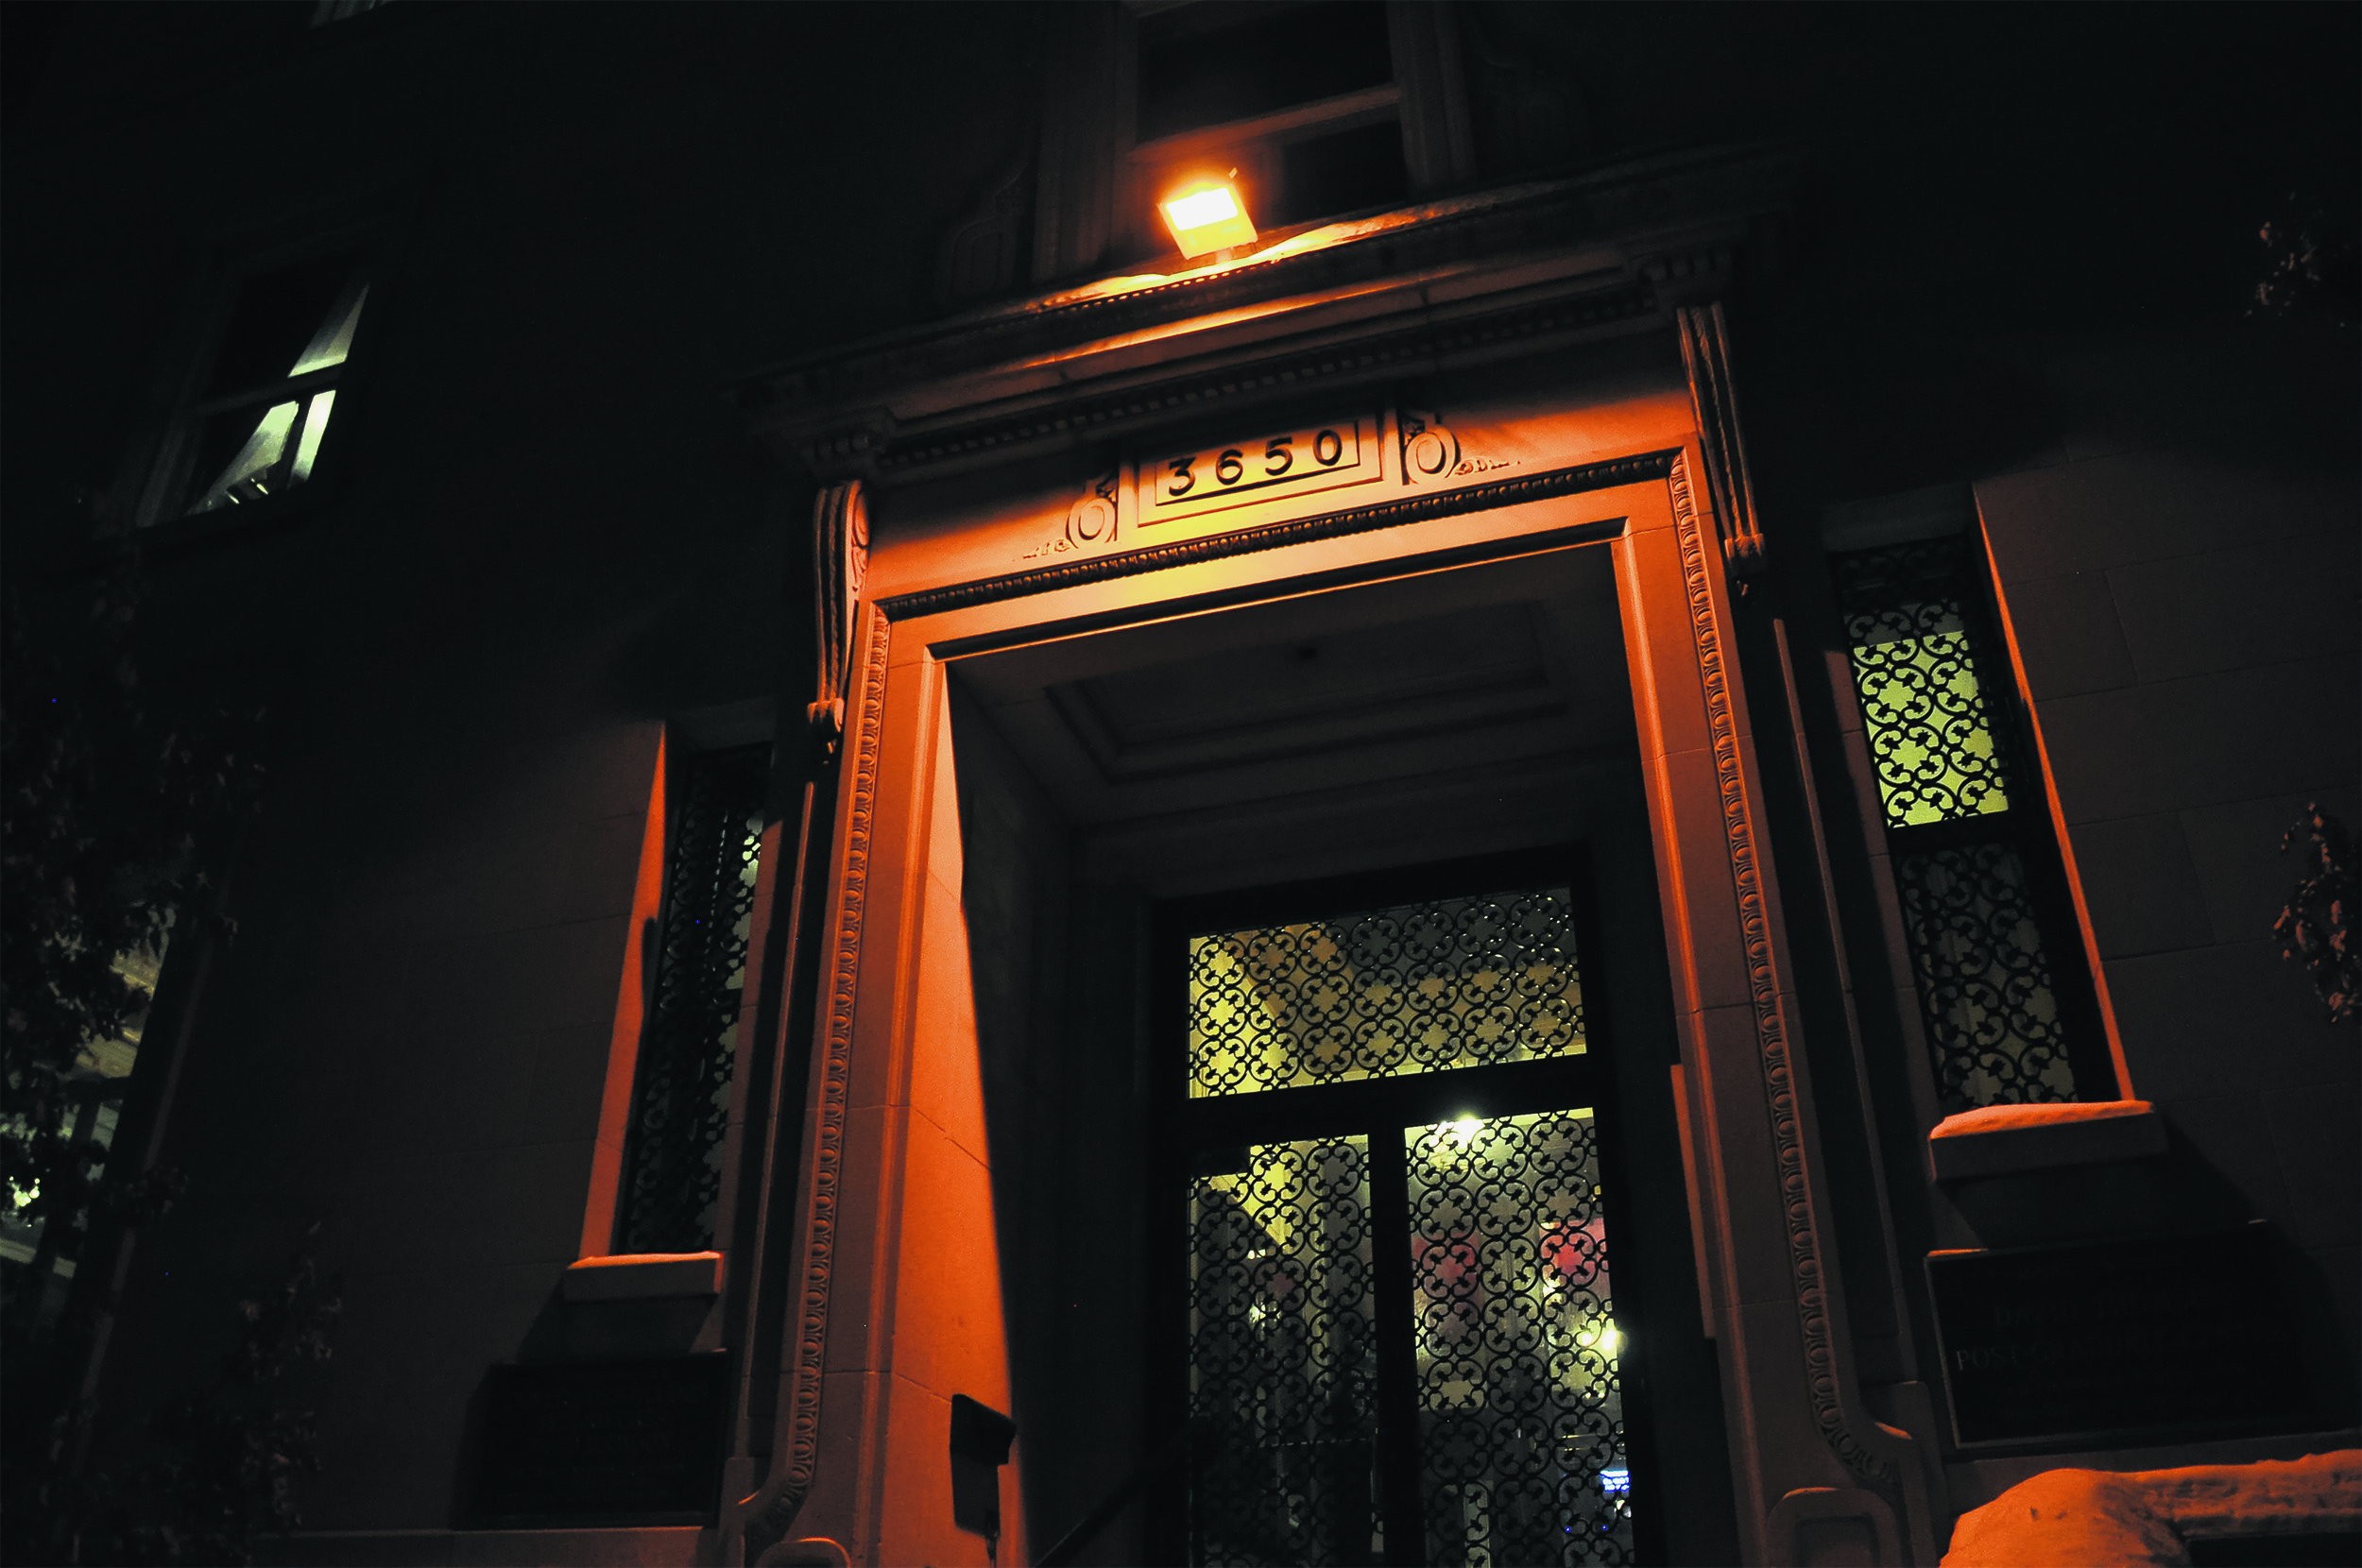 The entrance to the Thomson House in the dark, with an orange line shining down ominously.